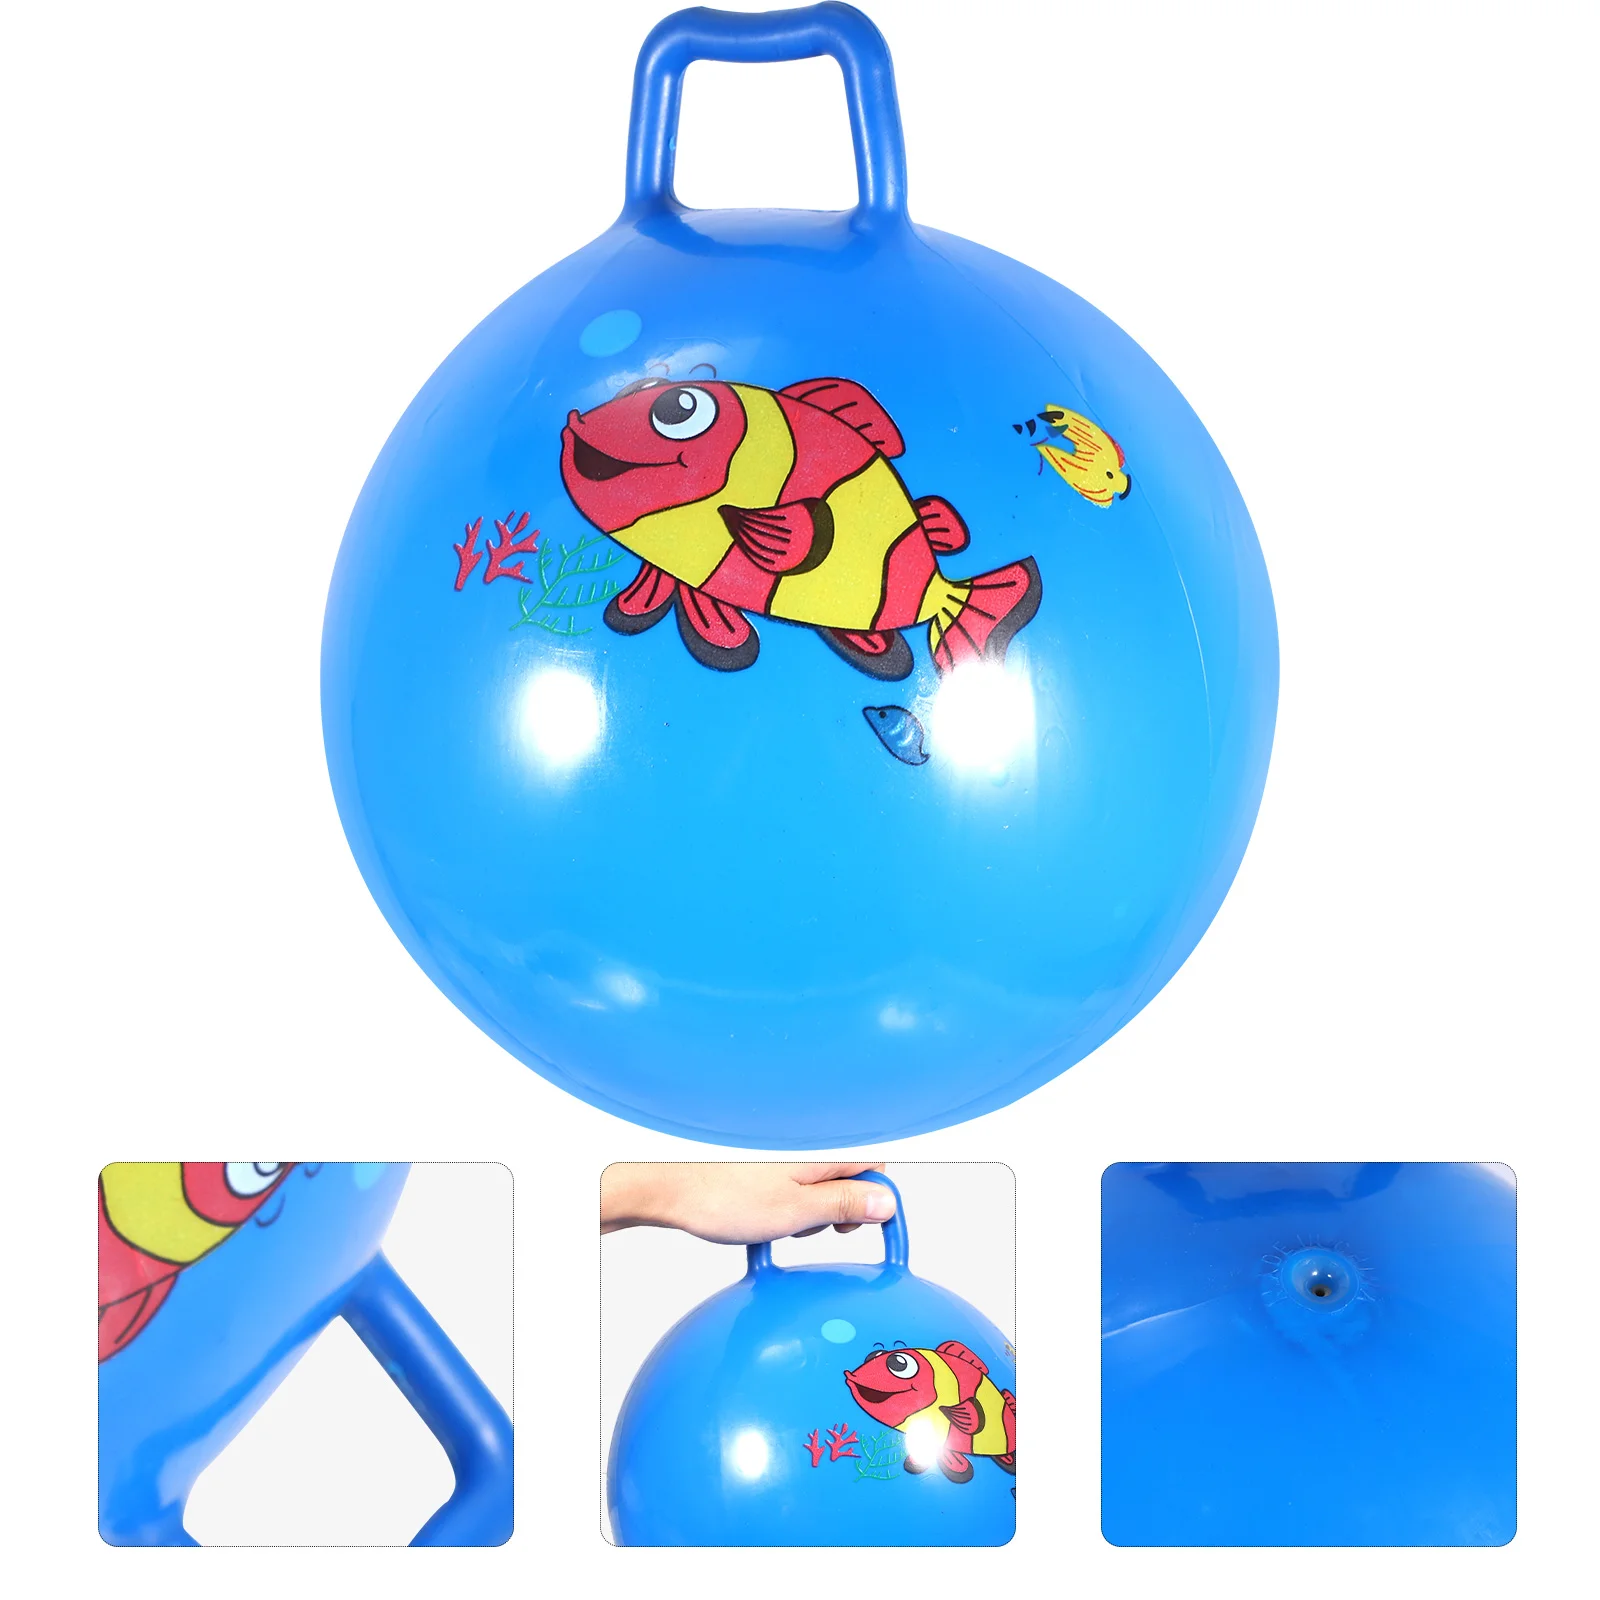 

Kids Bouncy Hopper Bounce Jumping Hopping Toys Hop Handles Inflatable Handle Horse Bouncing Toy Animal Space Ride 6 Hippity